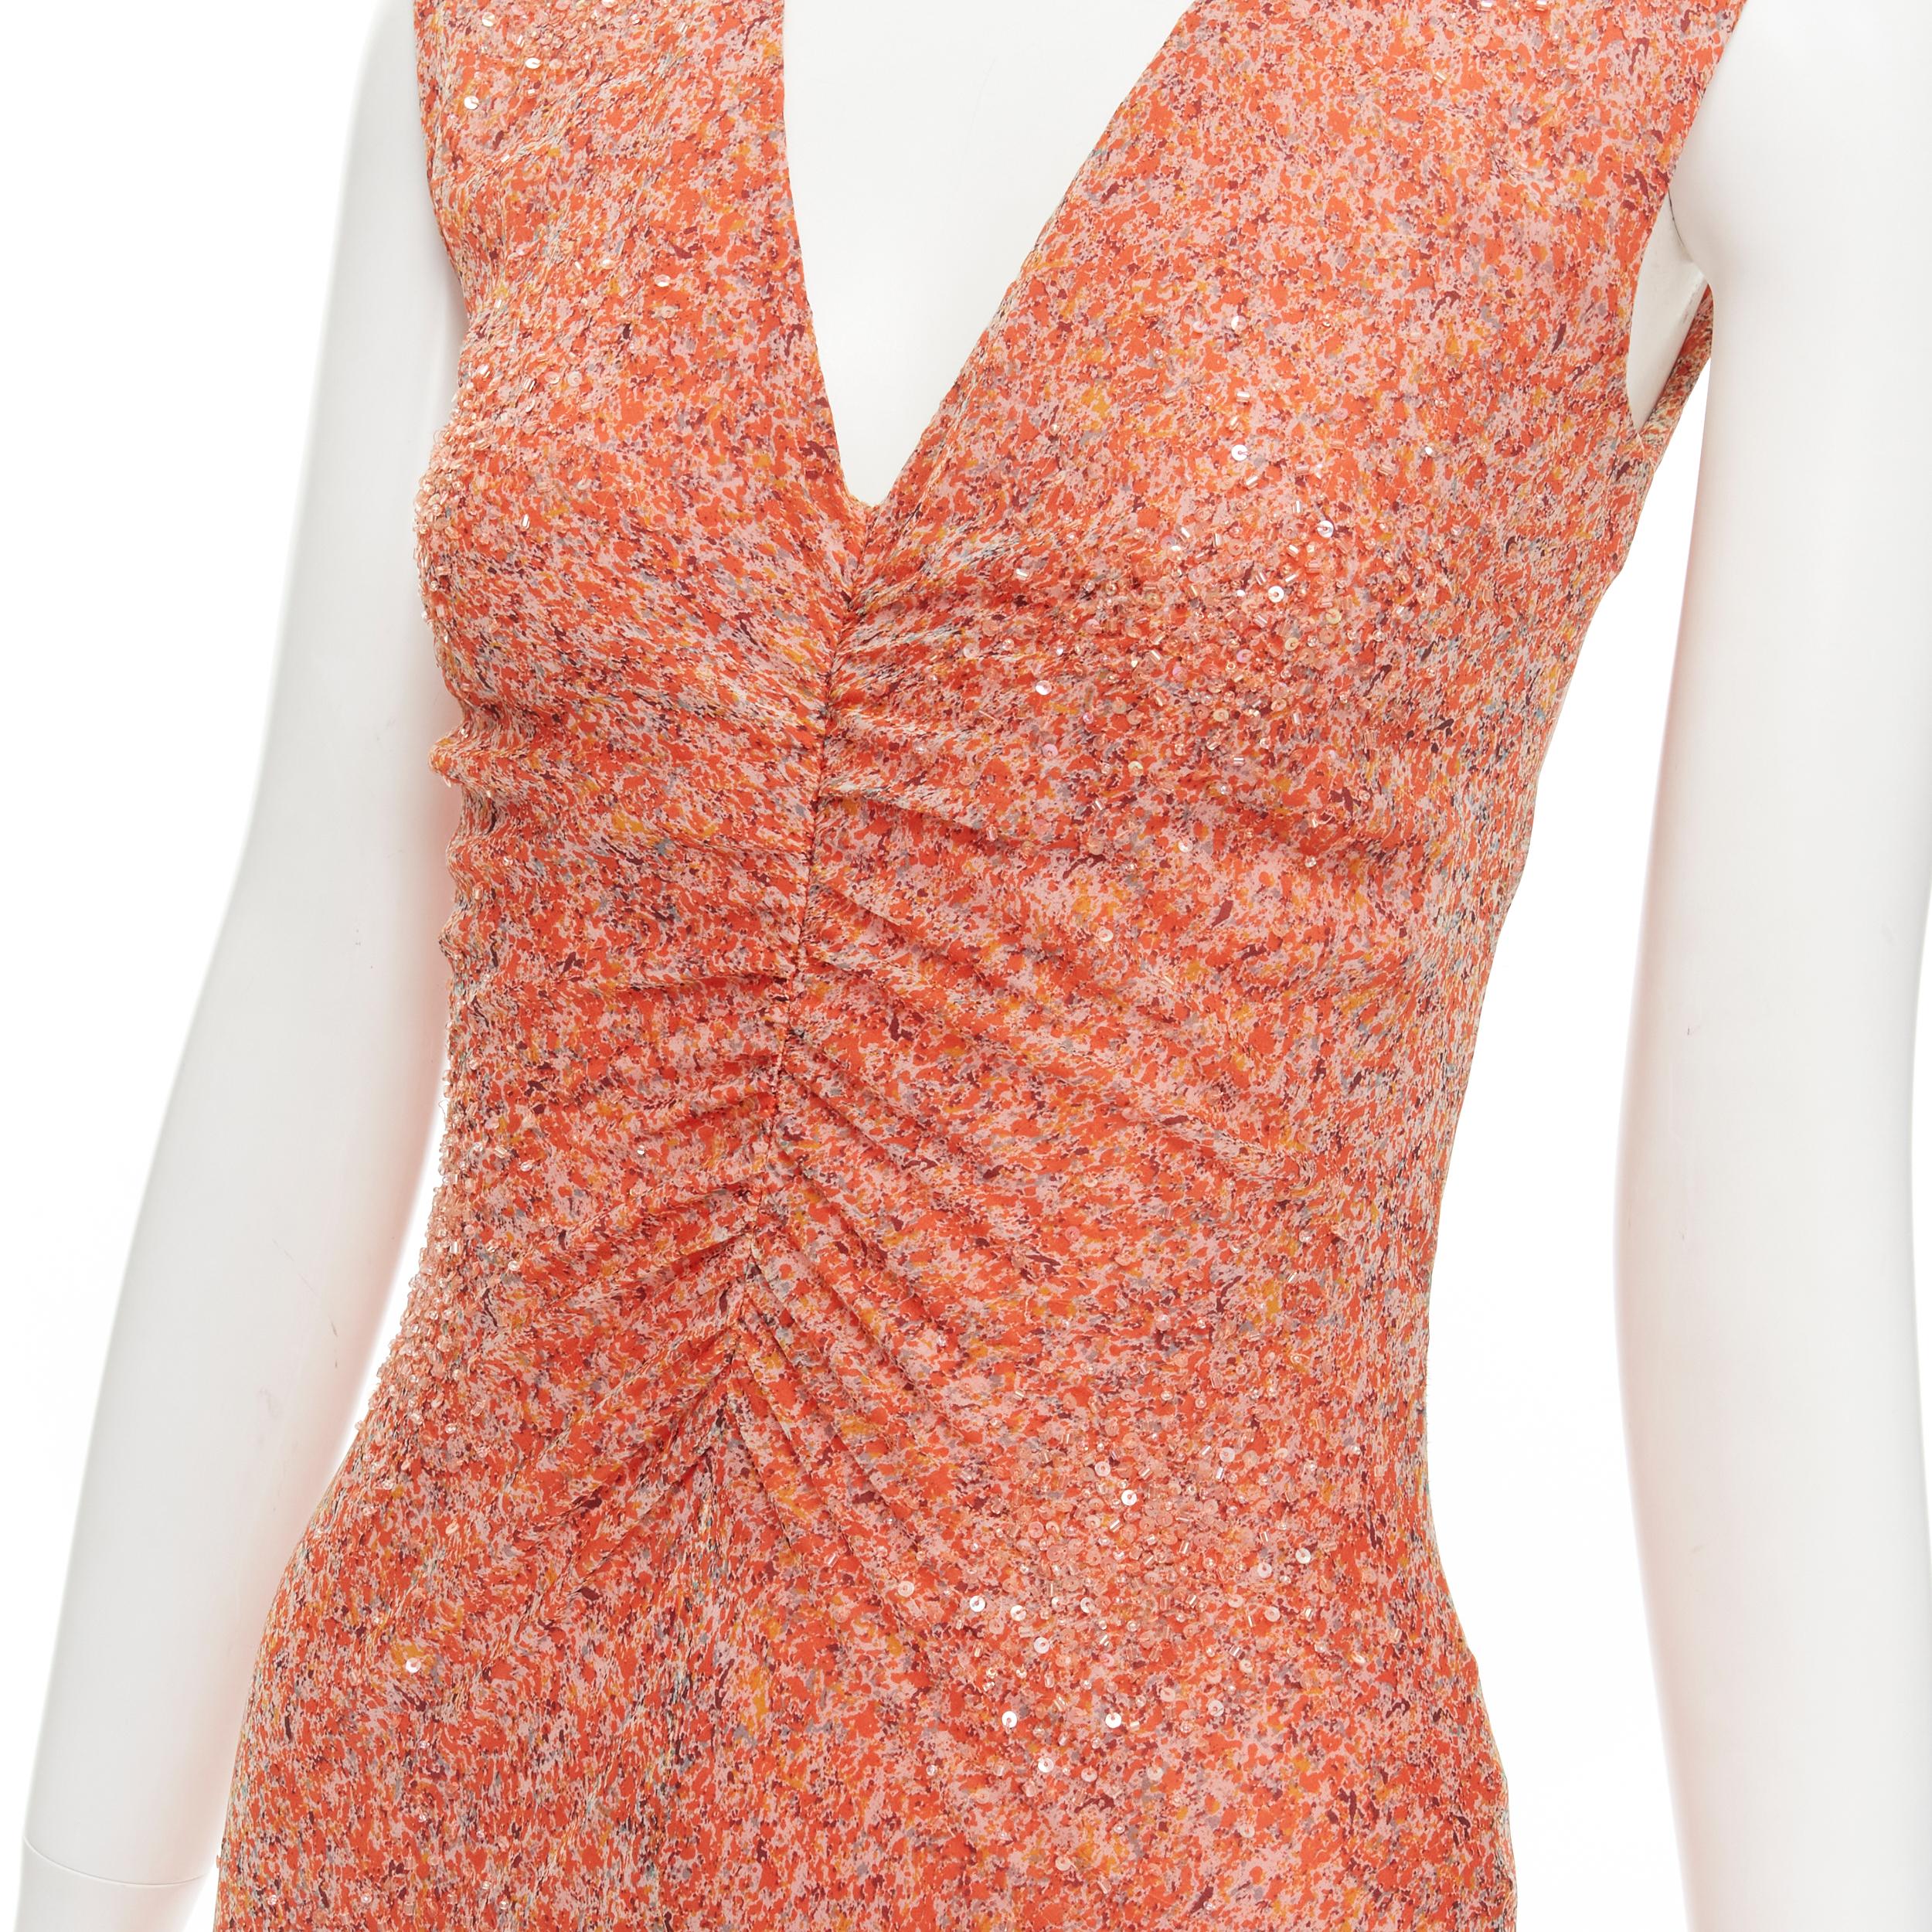 VERA WANG Vintage orange speckle print silk bead embellished evening gown US6 M 
Reference: GIYG/A00150 
Brand: Vera Wang 
Material: Silk 
Color: Orange 
Pattern: Abstract 
Extra Detail: Iridescent bead and sequins embellishment throughout. Ruched